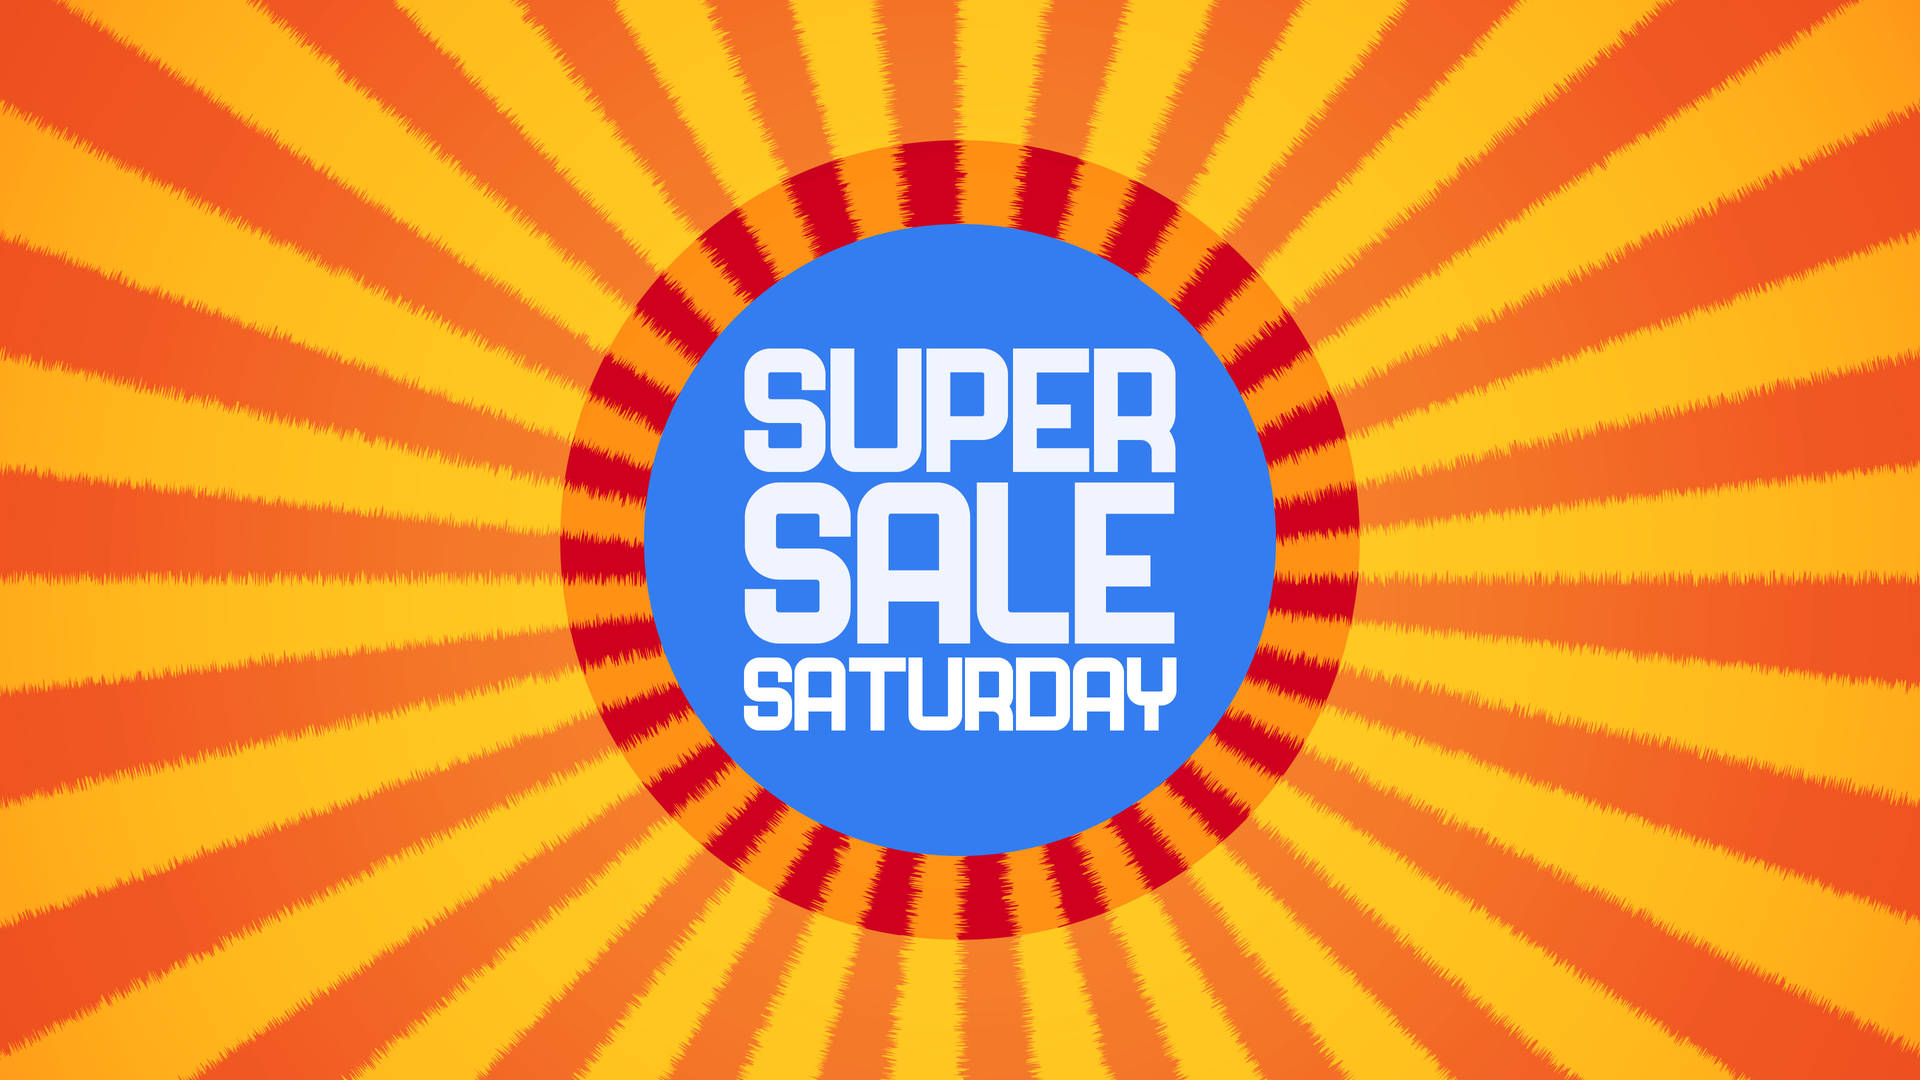 Super Saturday Sale With Sun Rays Background